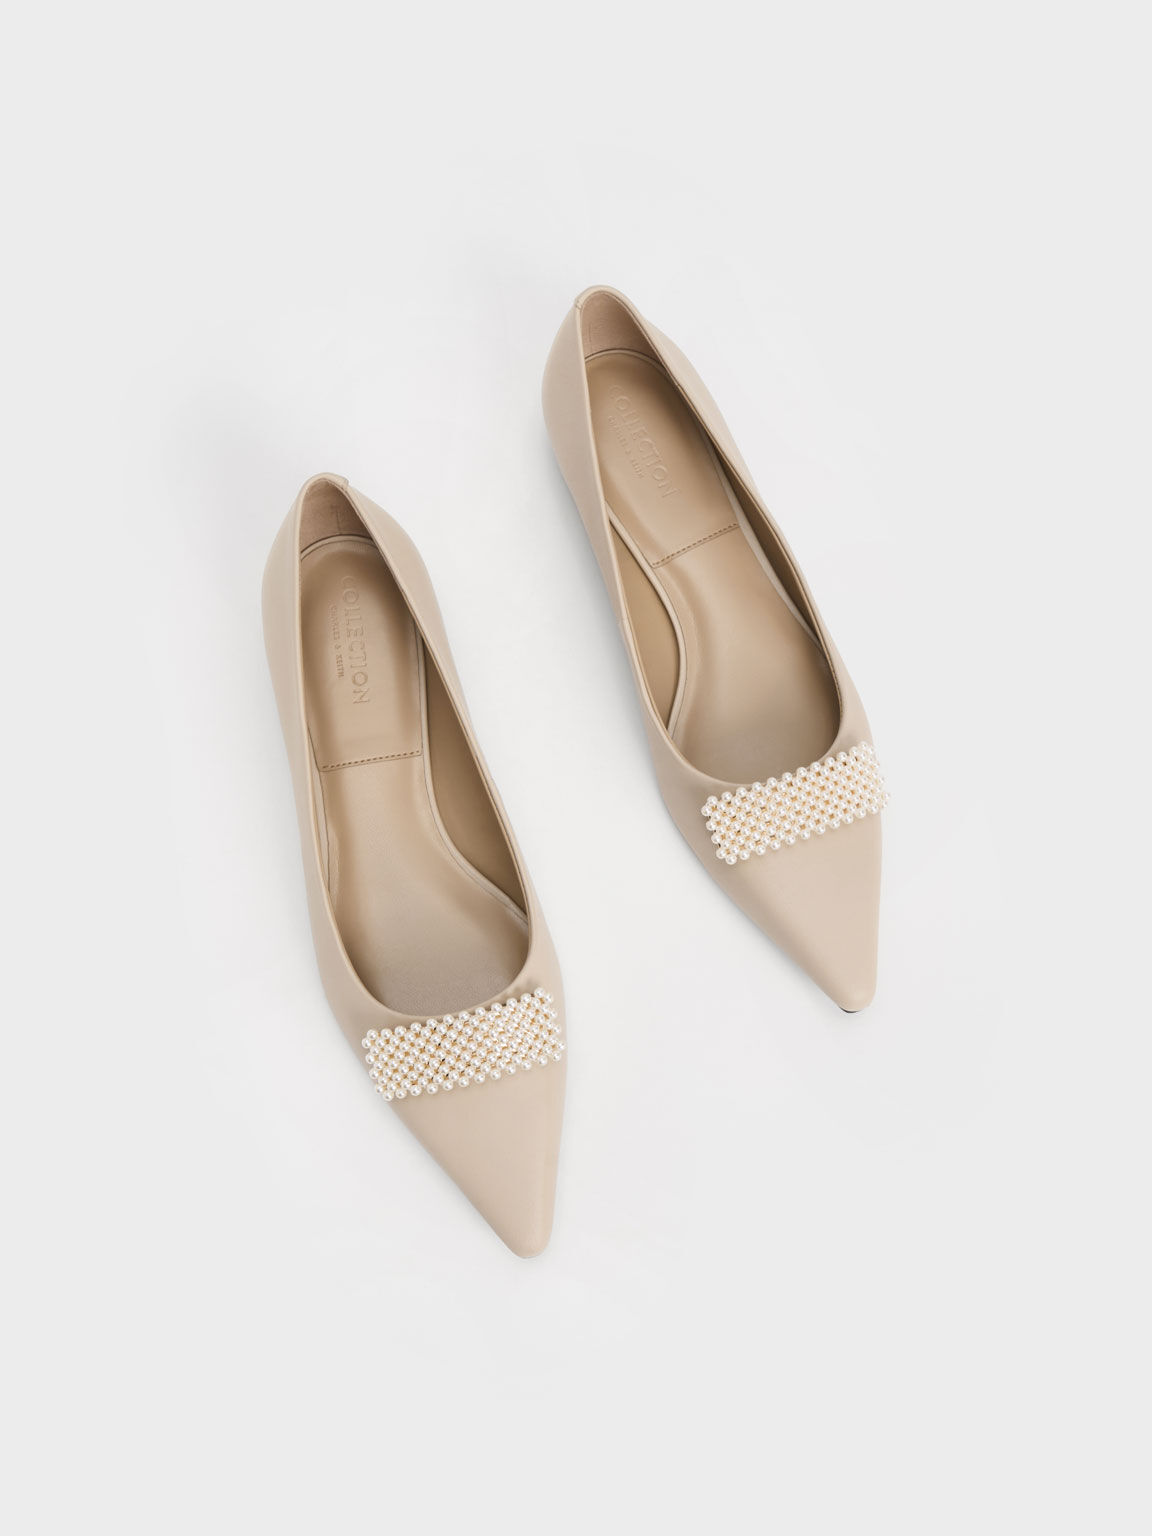 Leather Pointed-Toe Beaded Ballerinas, Beige, hi-res